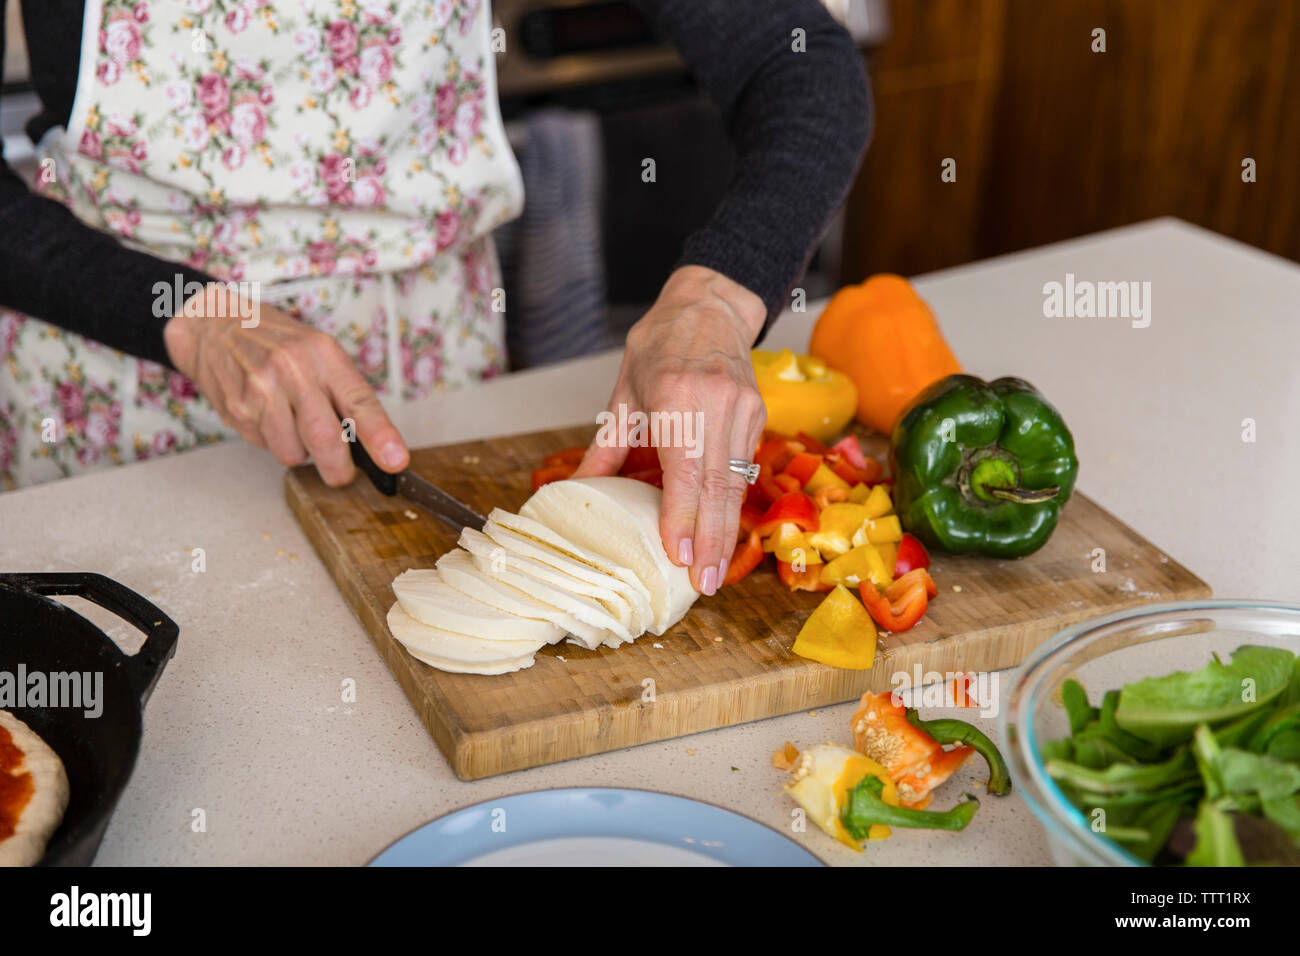 Midsection of woman cutting cheese while preparing food in kitchen at home Stock Photo